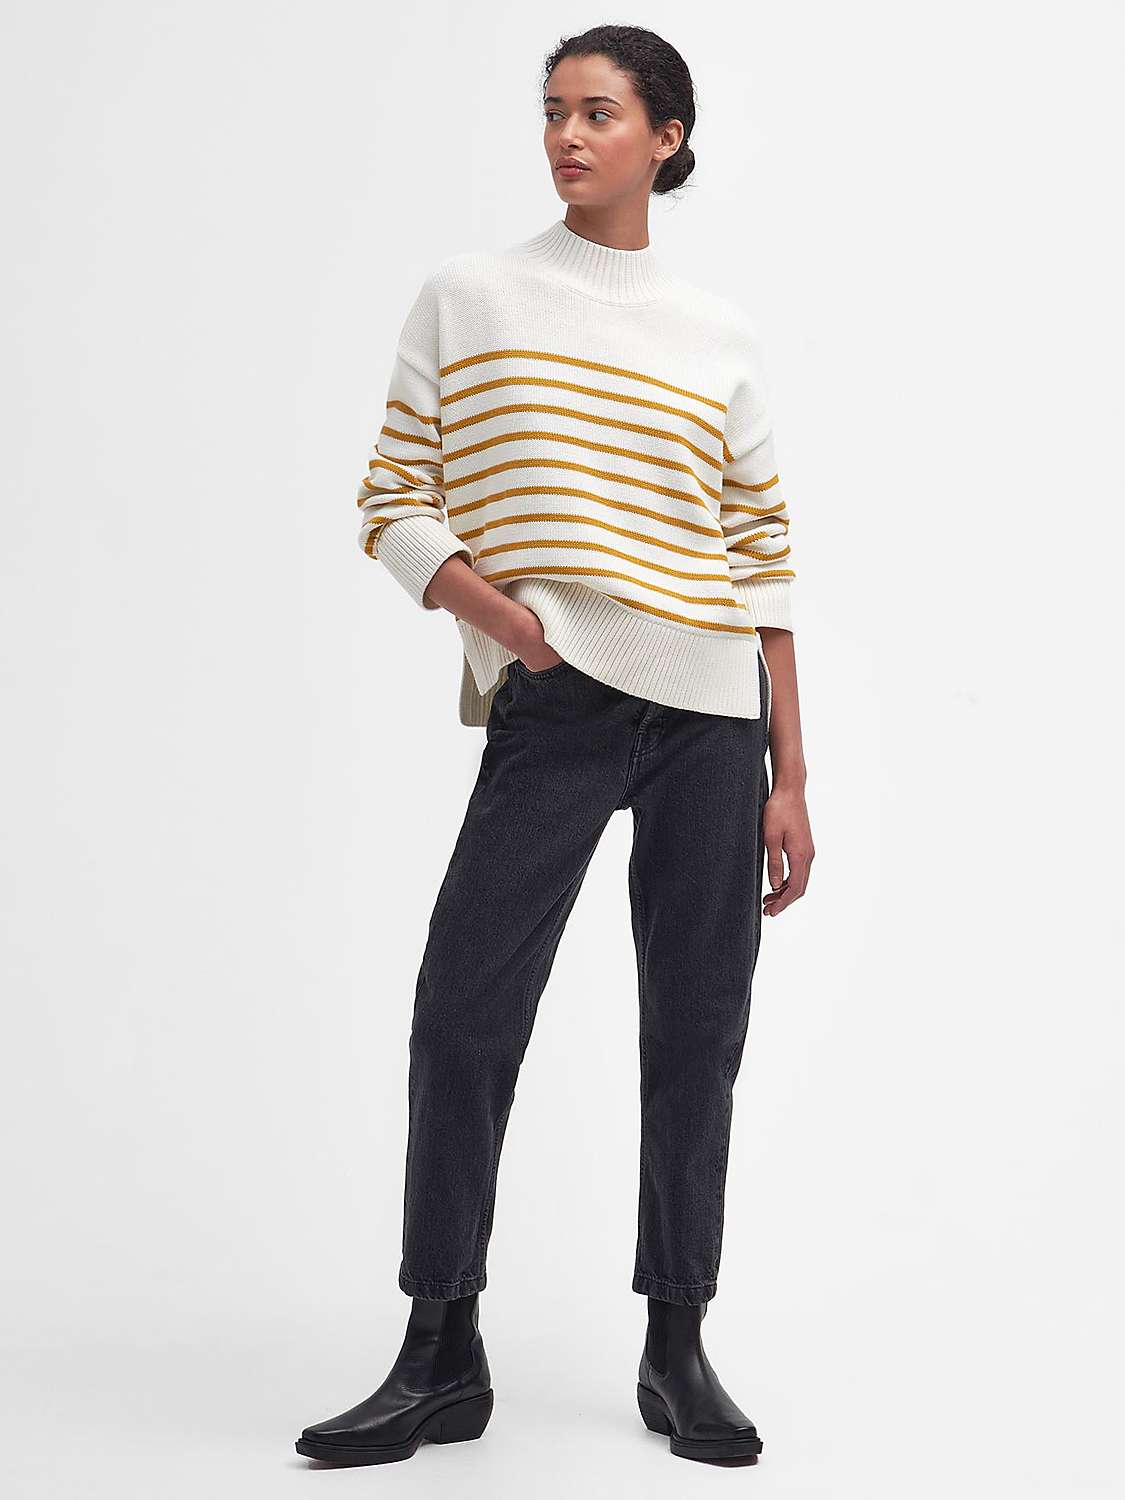 Buy Barbour Oakfield Striped Cotton Jumper, Ivory/Mustard Online at johnlewis.com